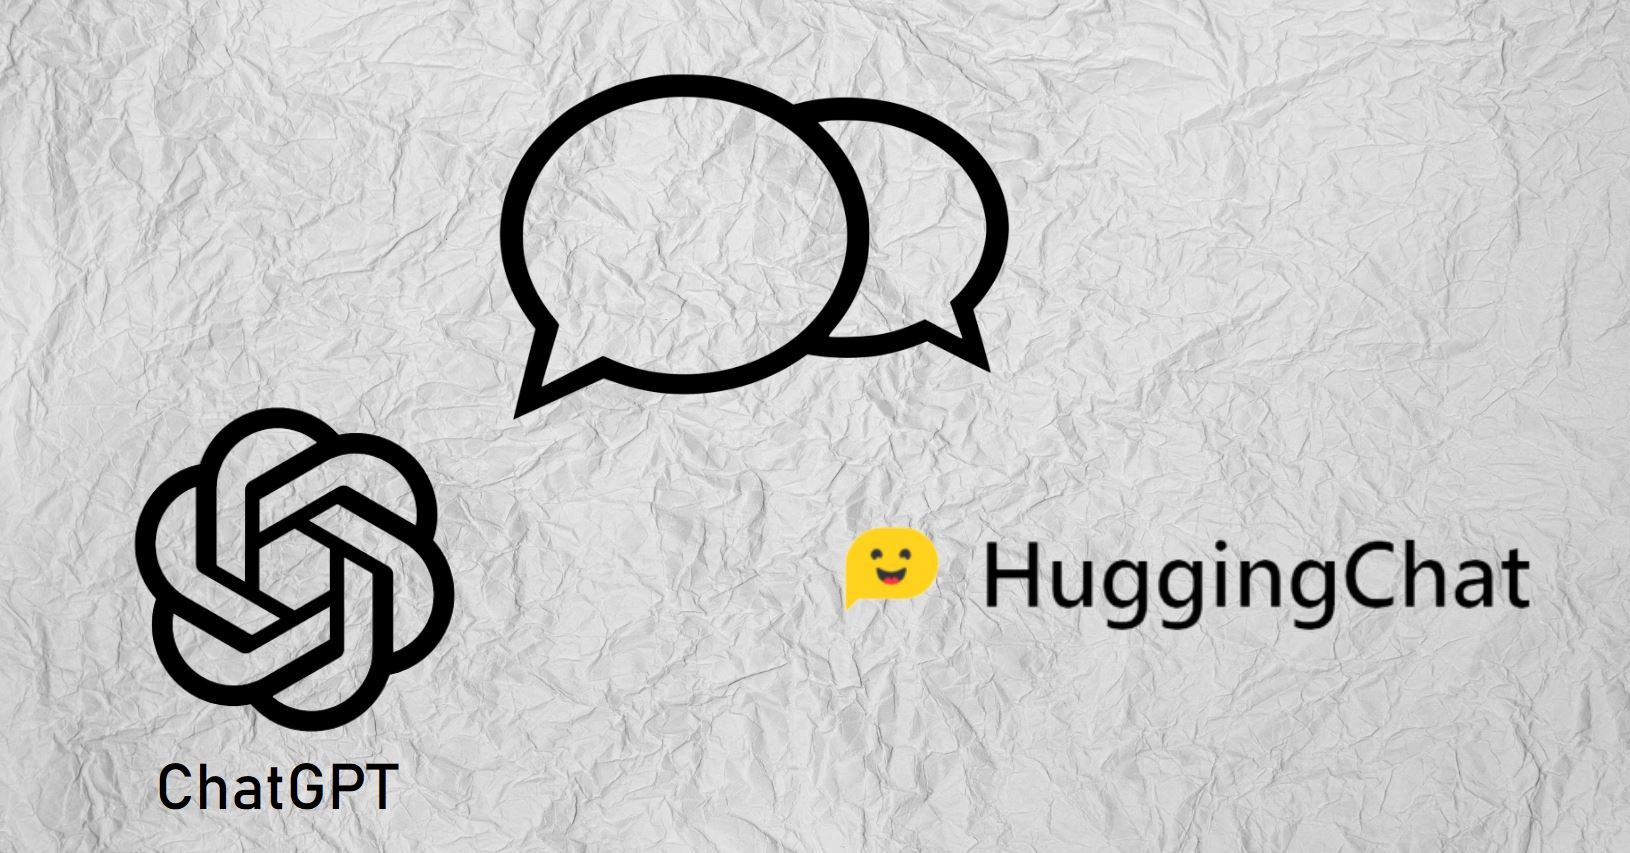 Exploring the Frontiers of AI: A Conversation between ChatGPT and HuggingChat